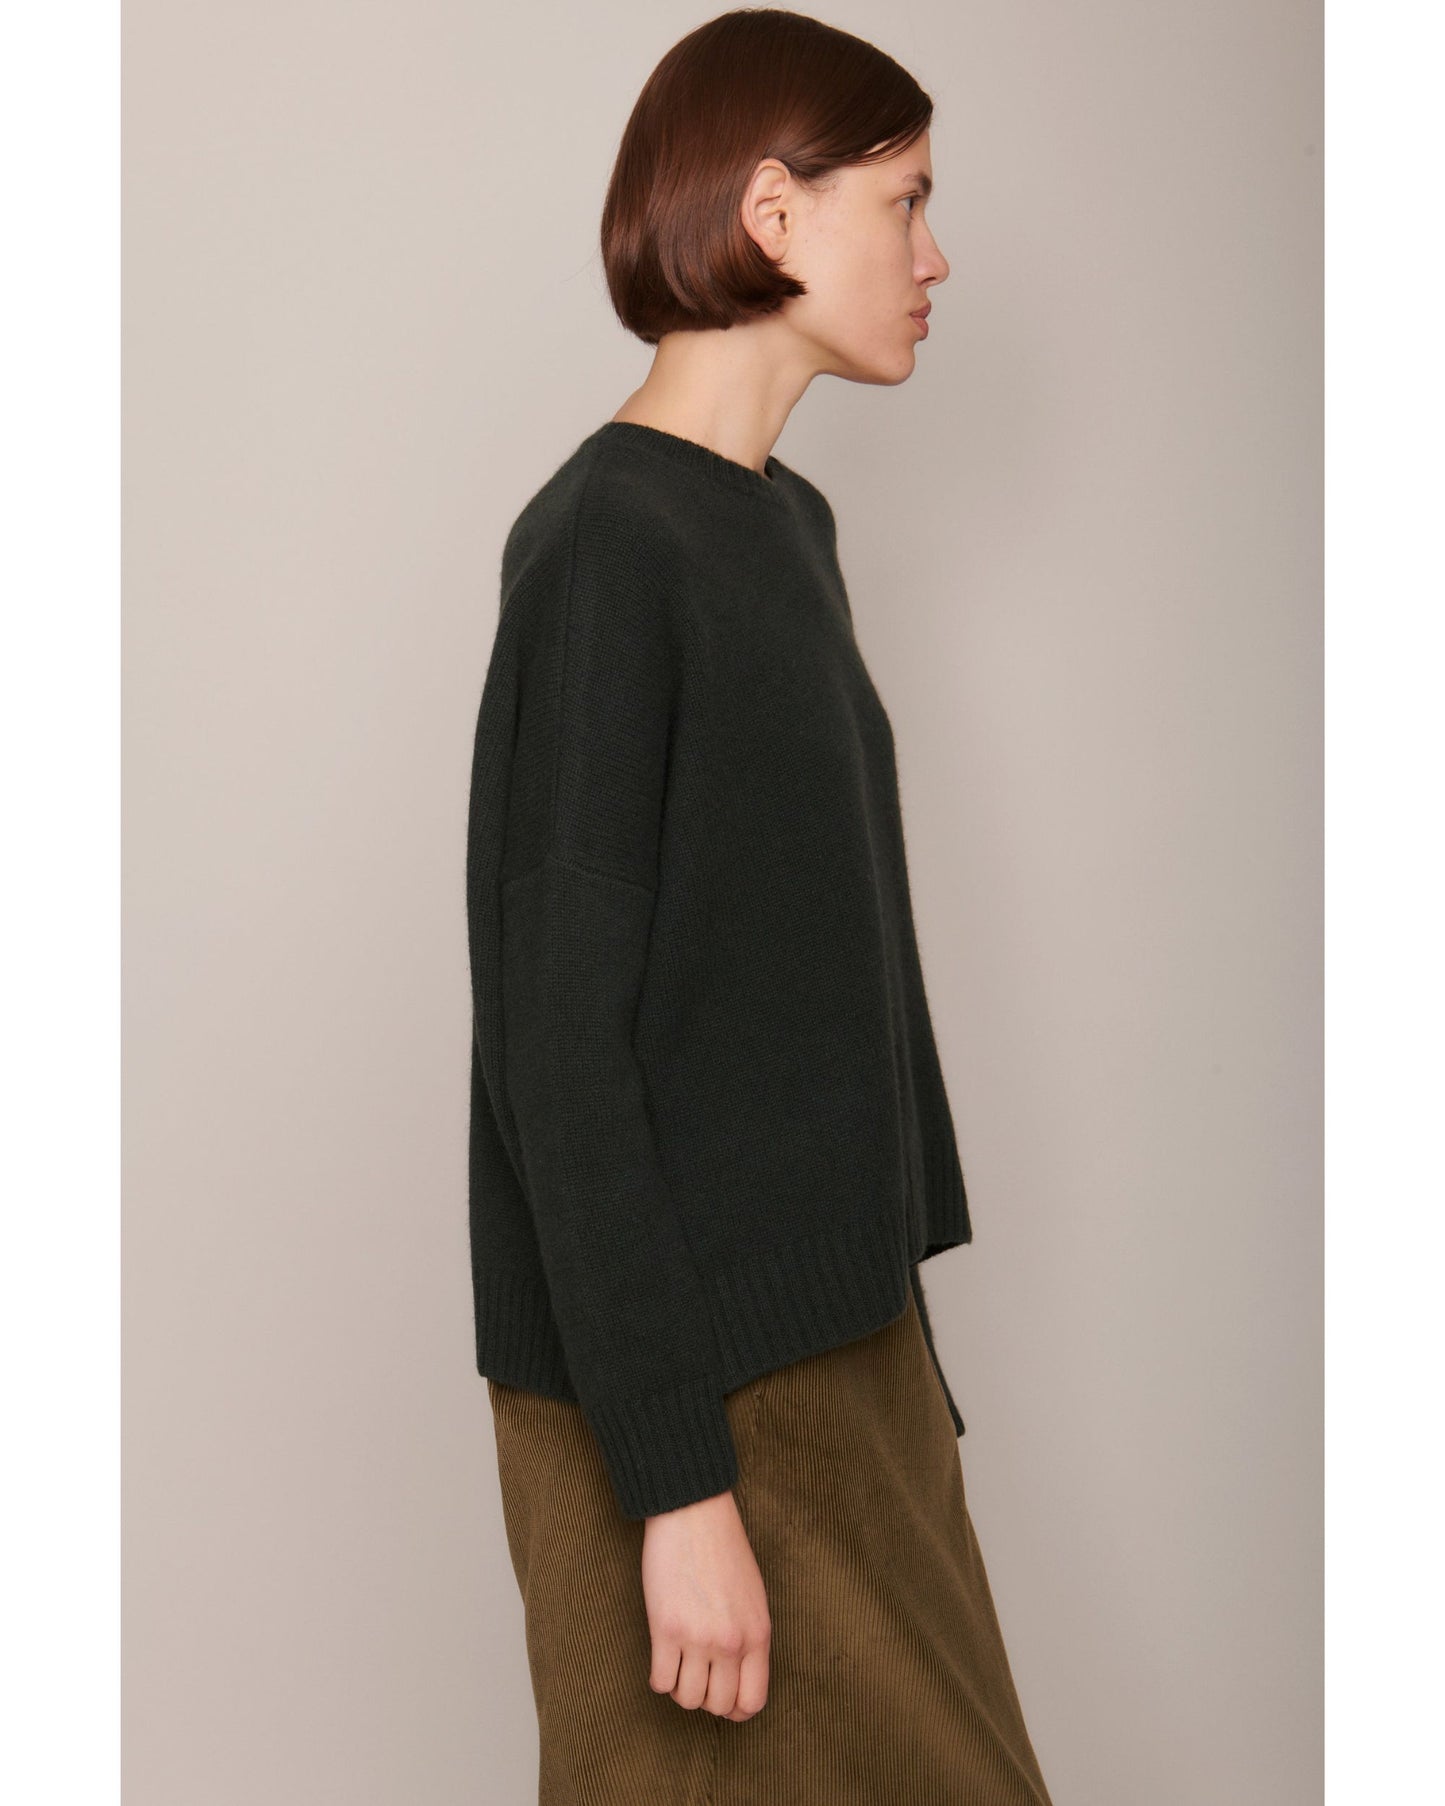 Organic by John Patrick Cashmere Wide Pullover Loden-Organic by John Patrick-Thistle Hill